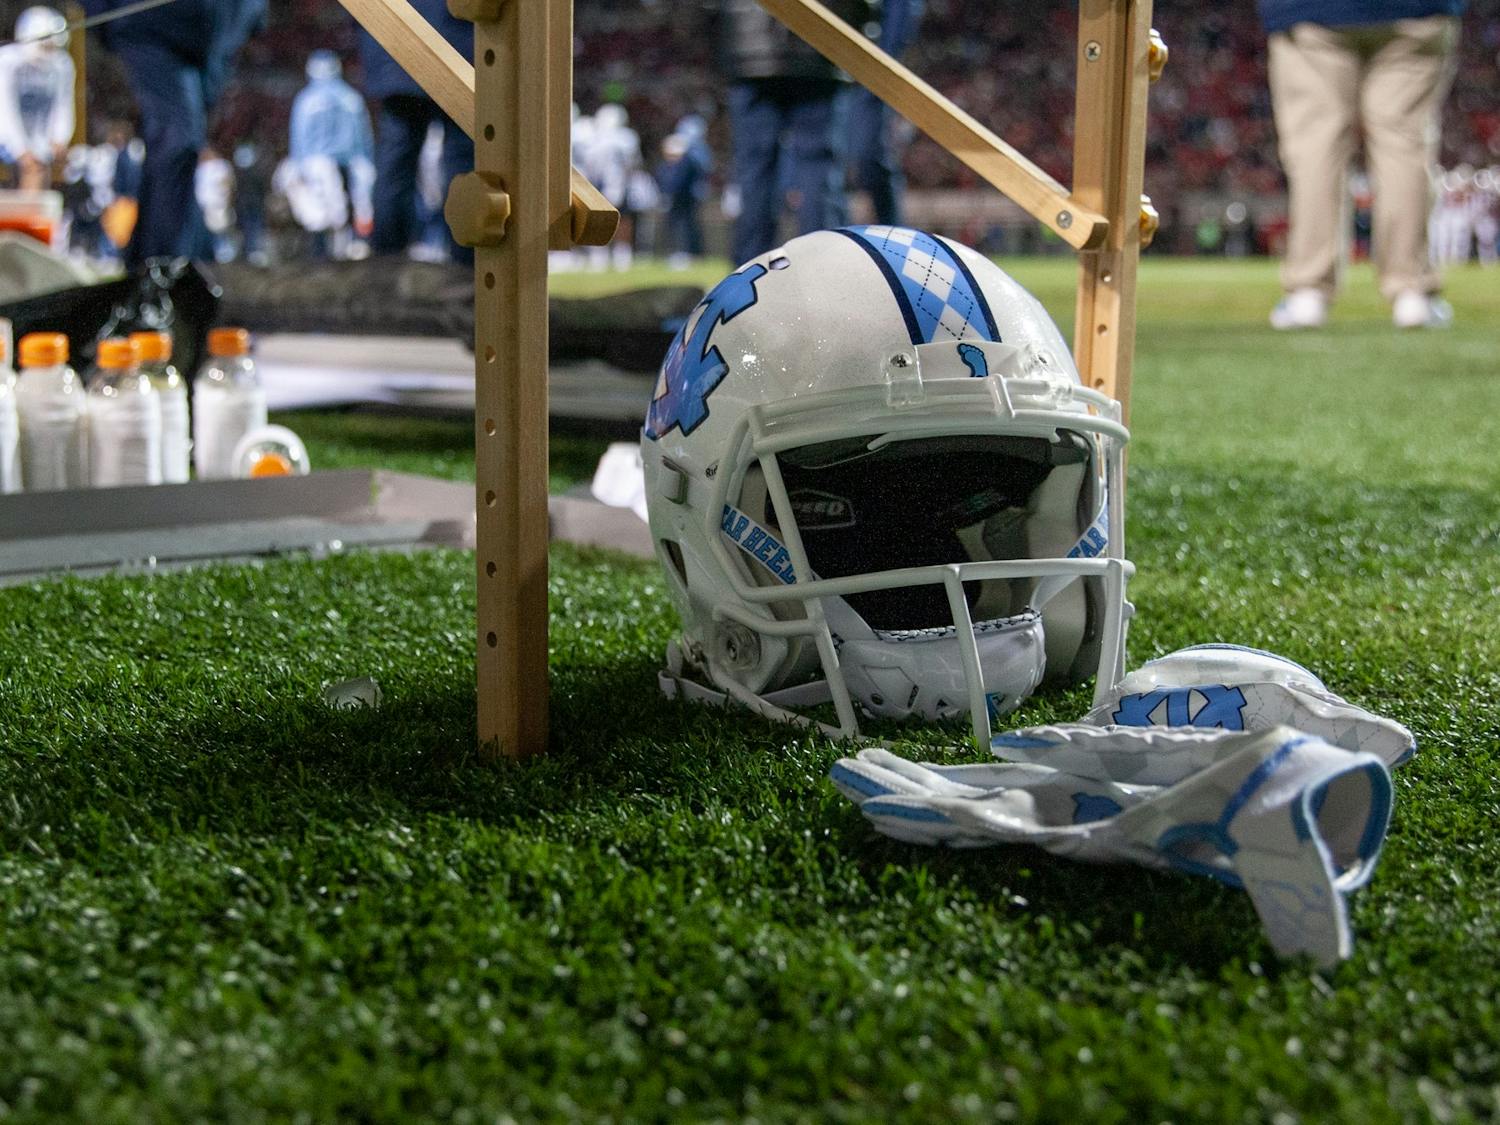 A UNC football helmet and gloves lie under a table during the Tar Heels' football game against the N.C. State Wolfpack at Carter Finley Stadium in Raleigh, NC, on Friday, Nov. 26, 2021. UNC lost 34-30.